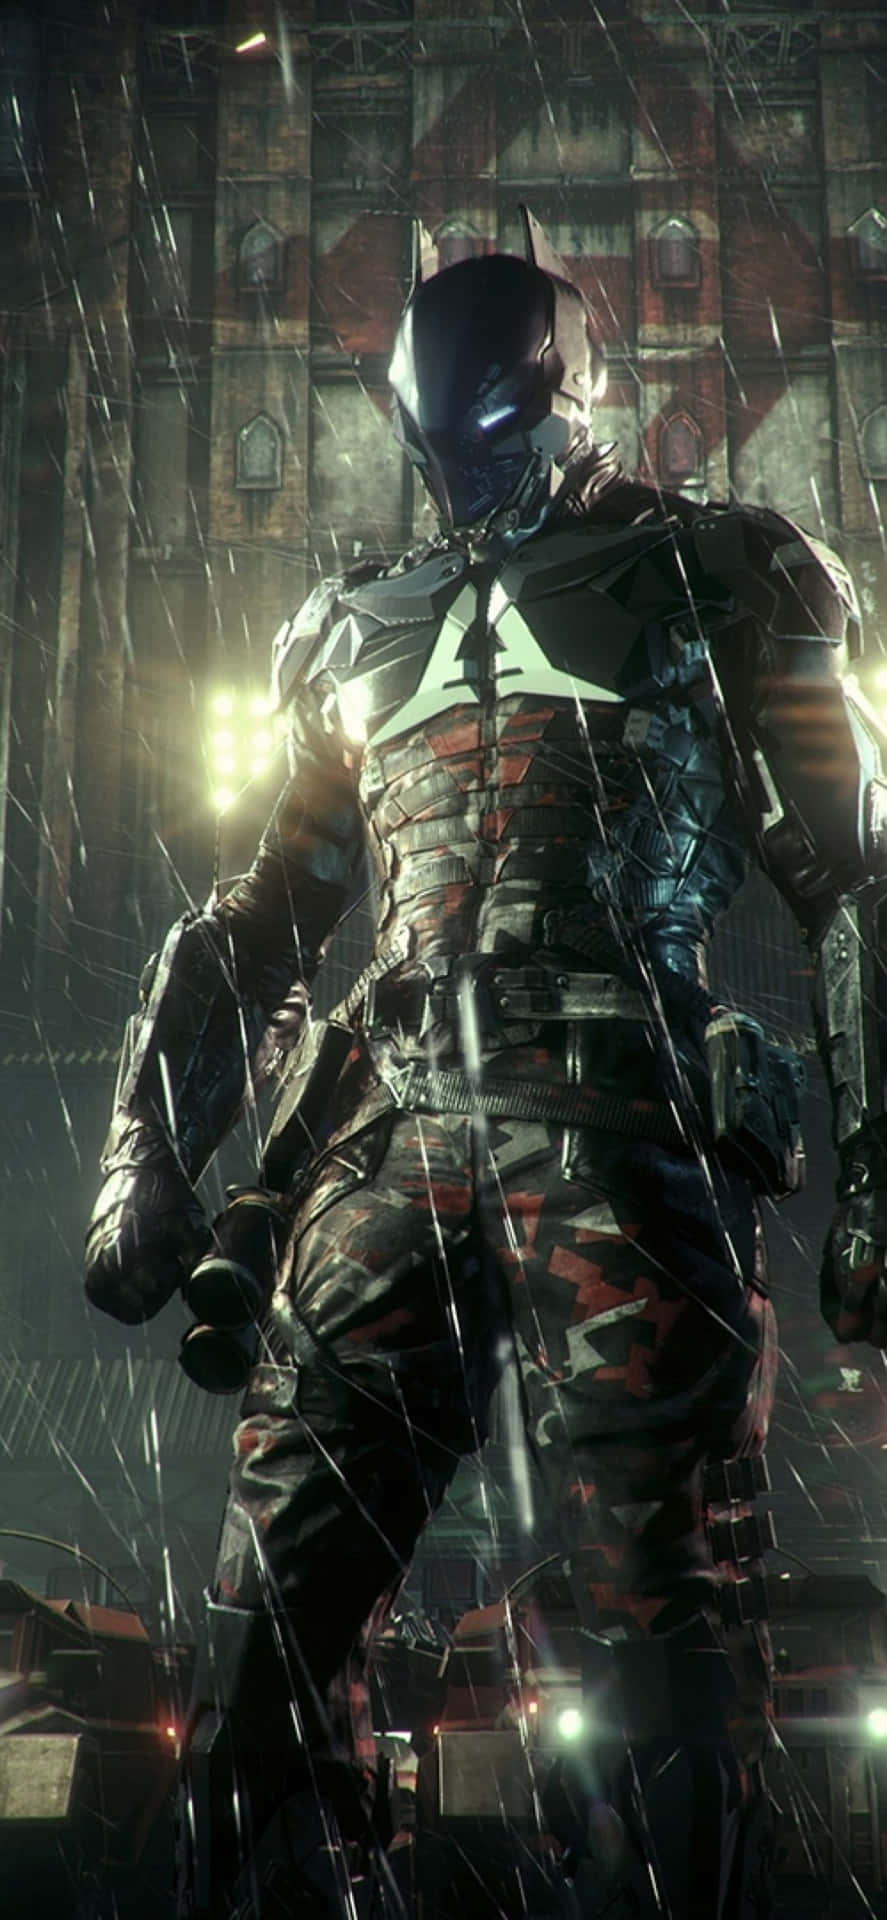 Batman stares out at Gotham City in the darker vision of the world of Batman: Arkham City.